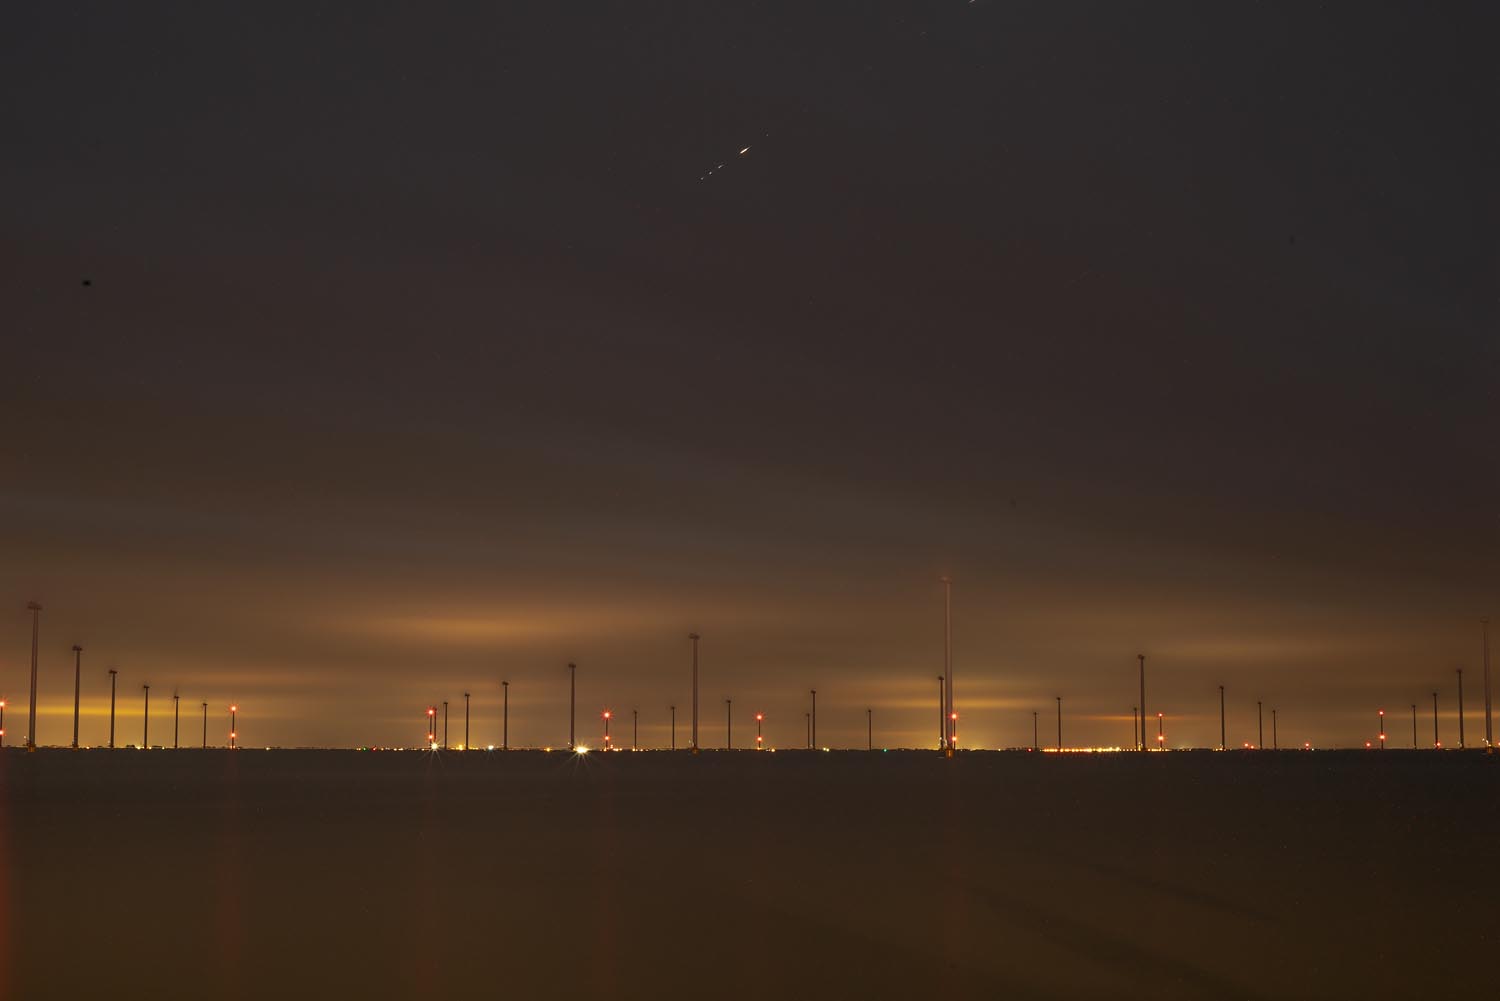 Sites at Risk of Climate Change: Night Landscape Photographs in The Netherlands, Steve Giovinco, Eerie Wind Farm Sustainable Energy with Strange Yellow Glowing Light Fryslan, Flevoland